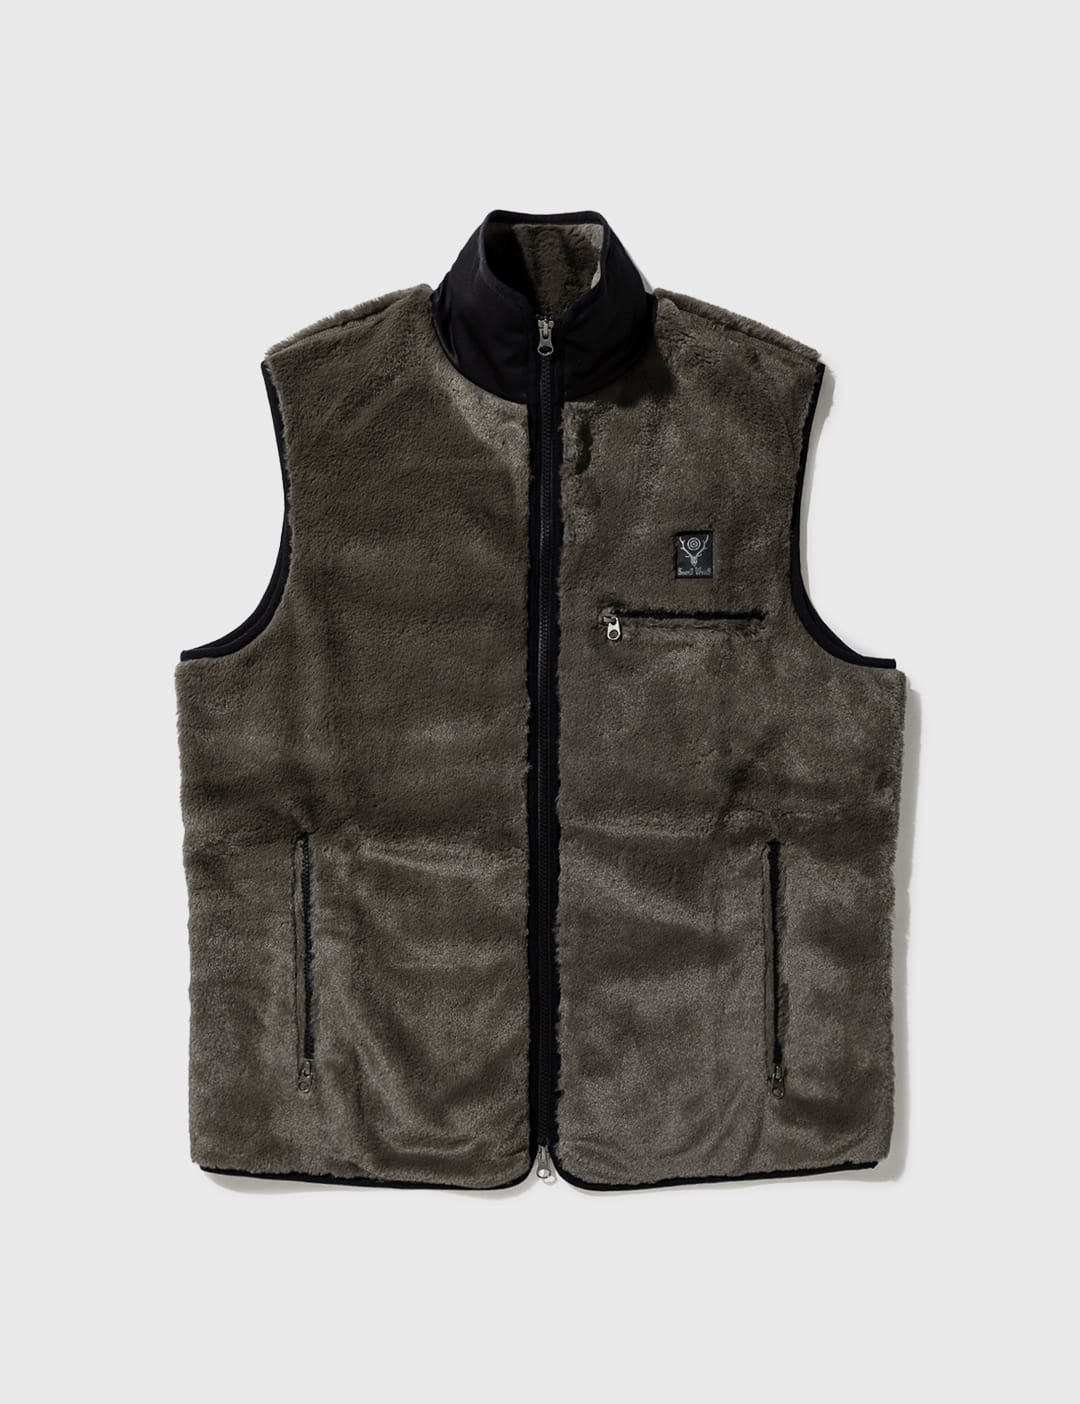 South2 West8 - Piping Vest | HBX - Globally Curated Fashion and 